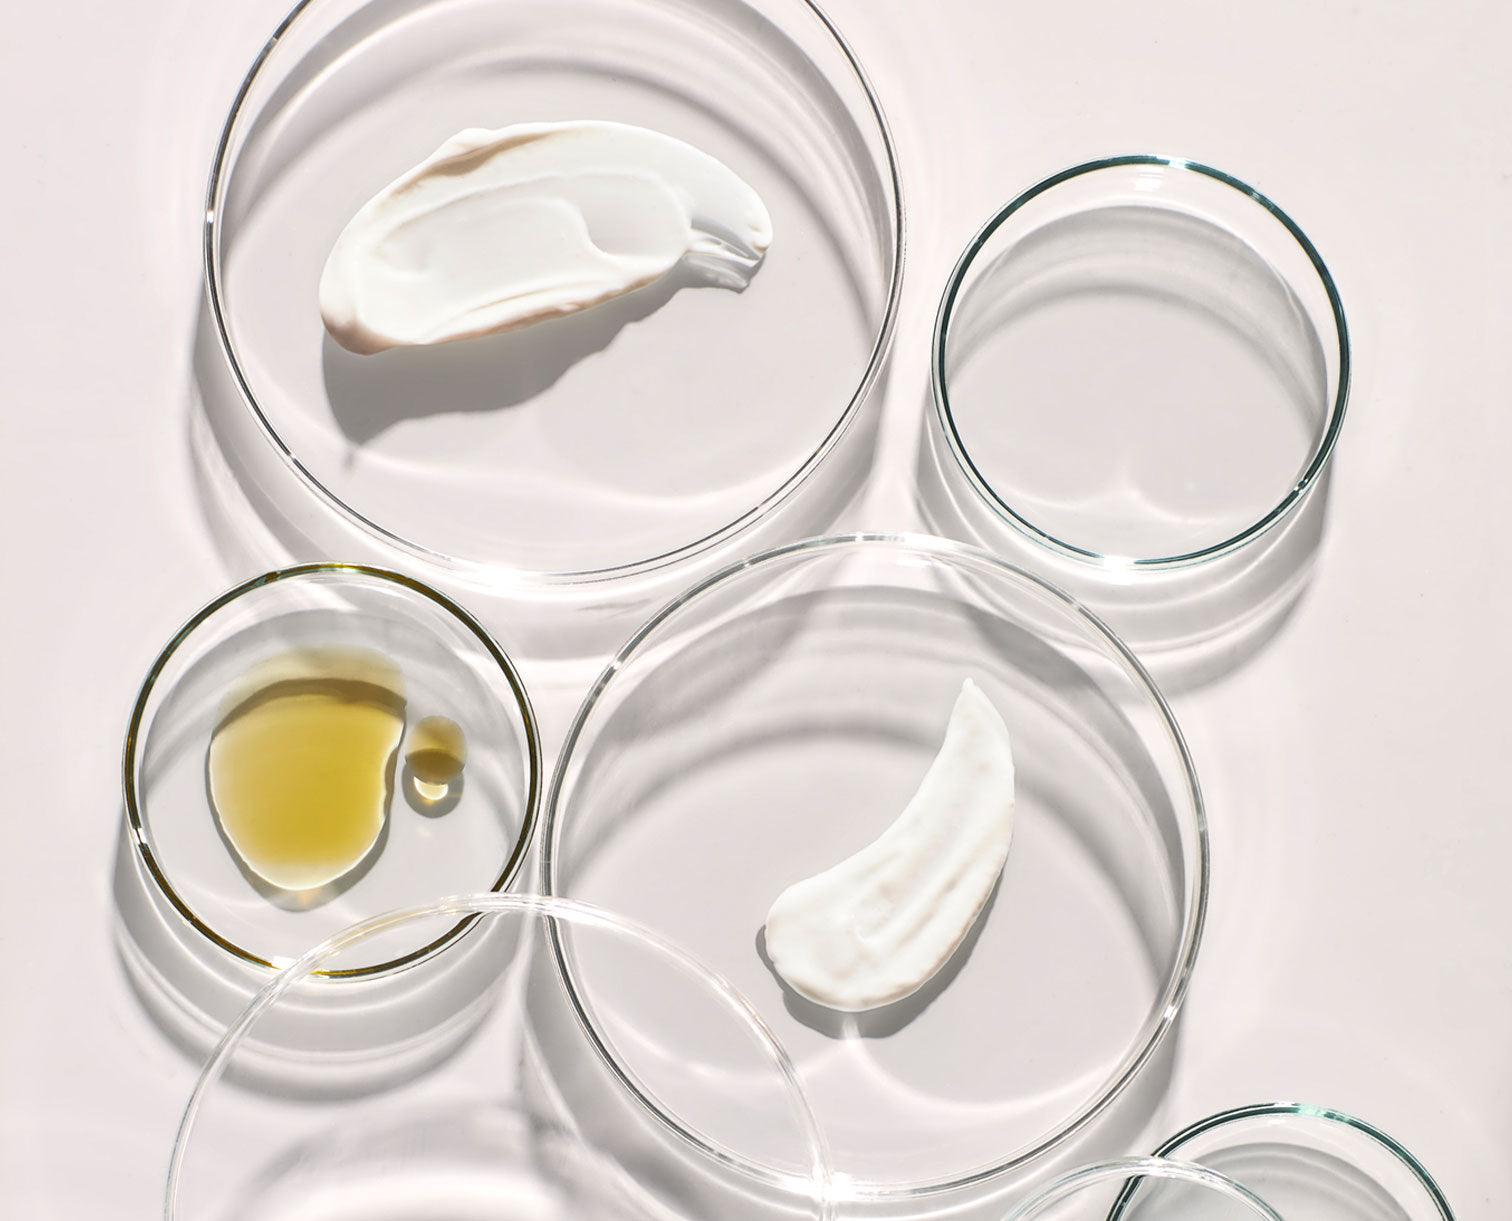 Image of Codex Beauty Labs product oil and cream textures displayed on various petri dishes